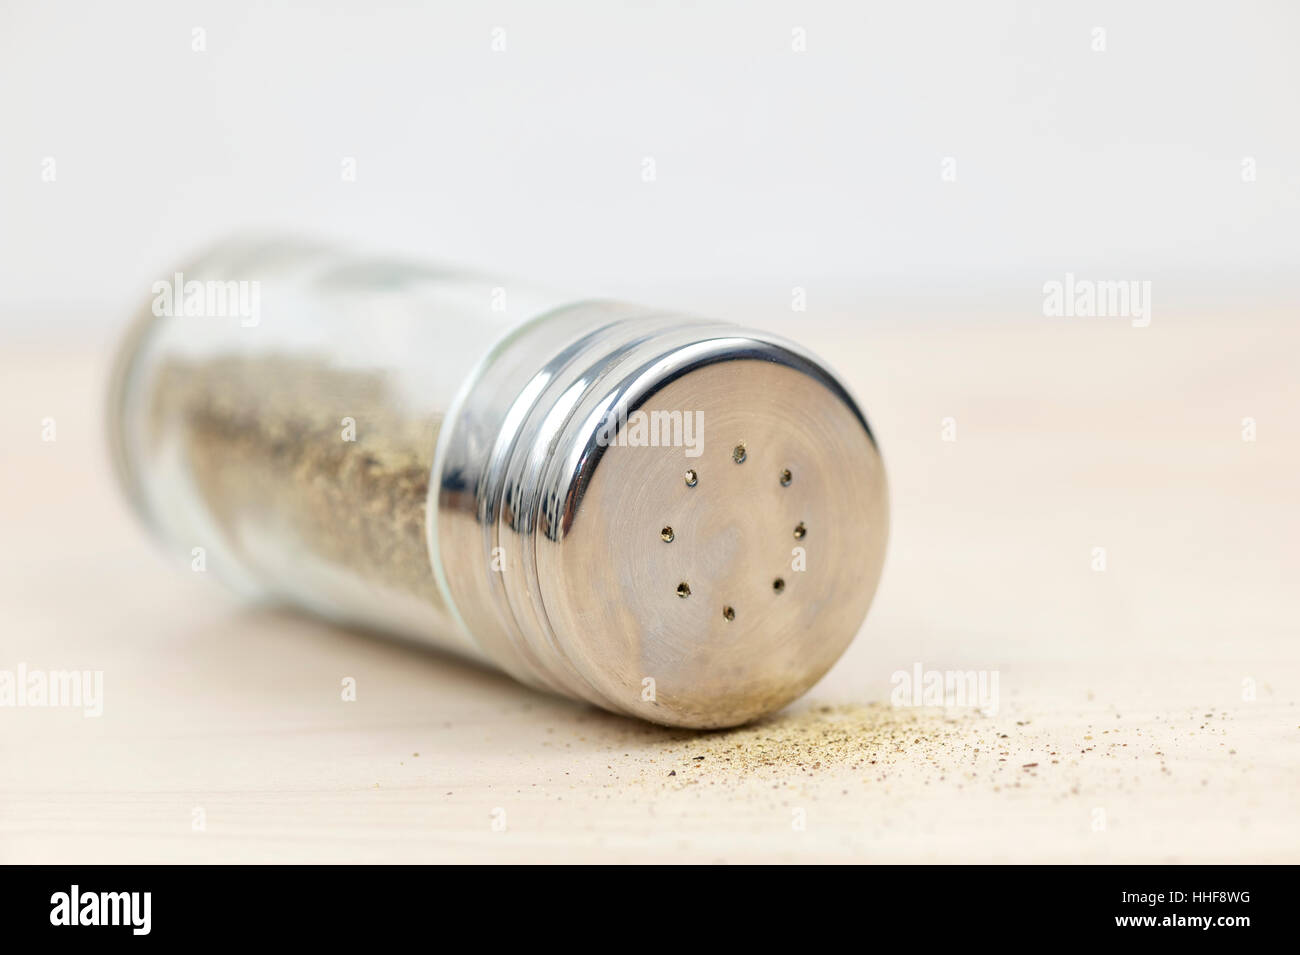 salt, pepper, spice, kitchen, cuisine, boil, cooks, boiling, cooking, food, Stock Photo